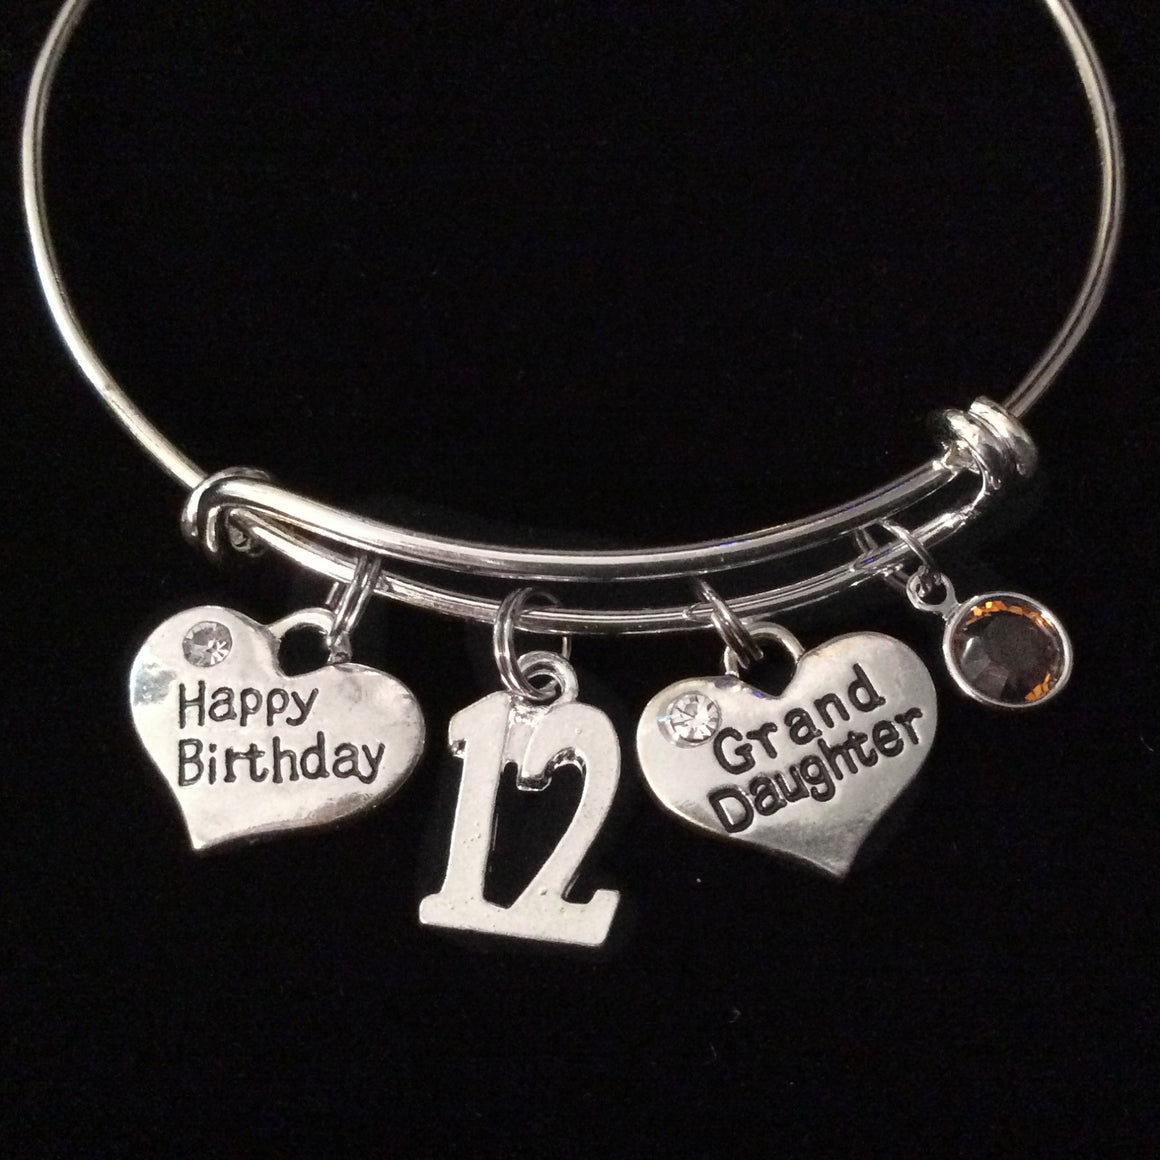 Grand Daughter Happy Birthday 12th Expandable Charm Bracelet Adjustable Bangle Trendy Gift